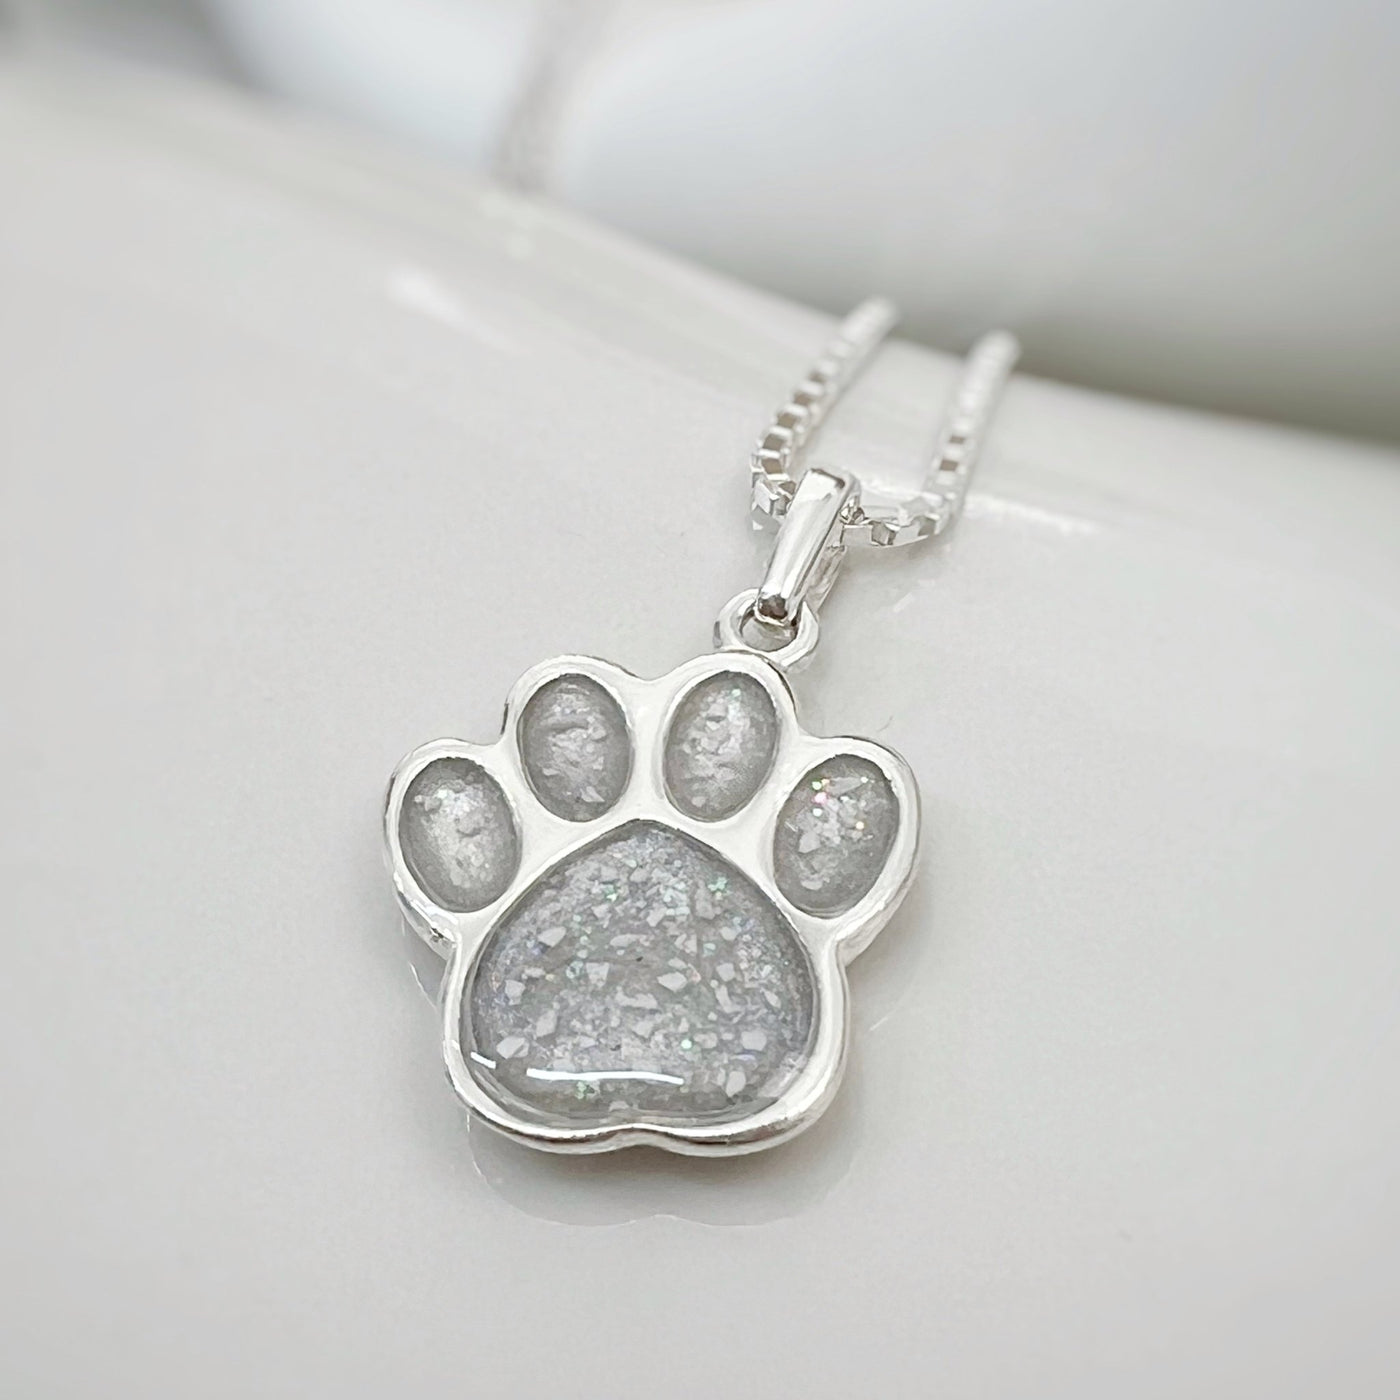 Pet Memorial Jewellery - Jewellery with Pets Ashes